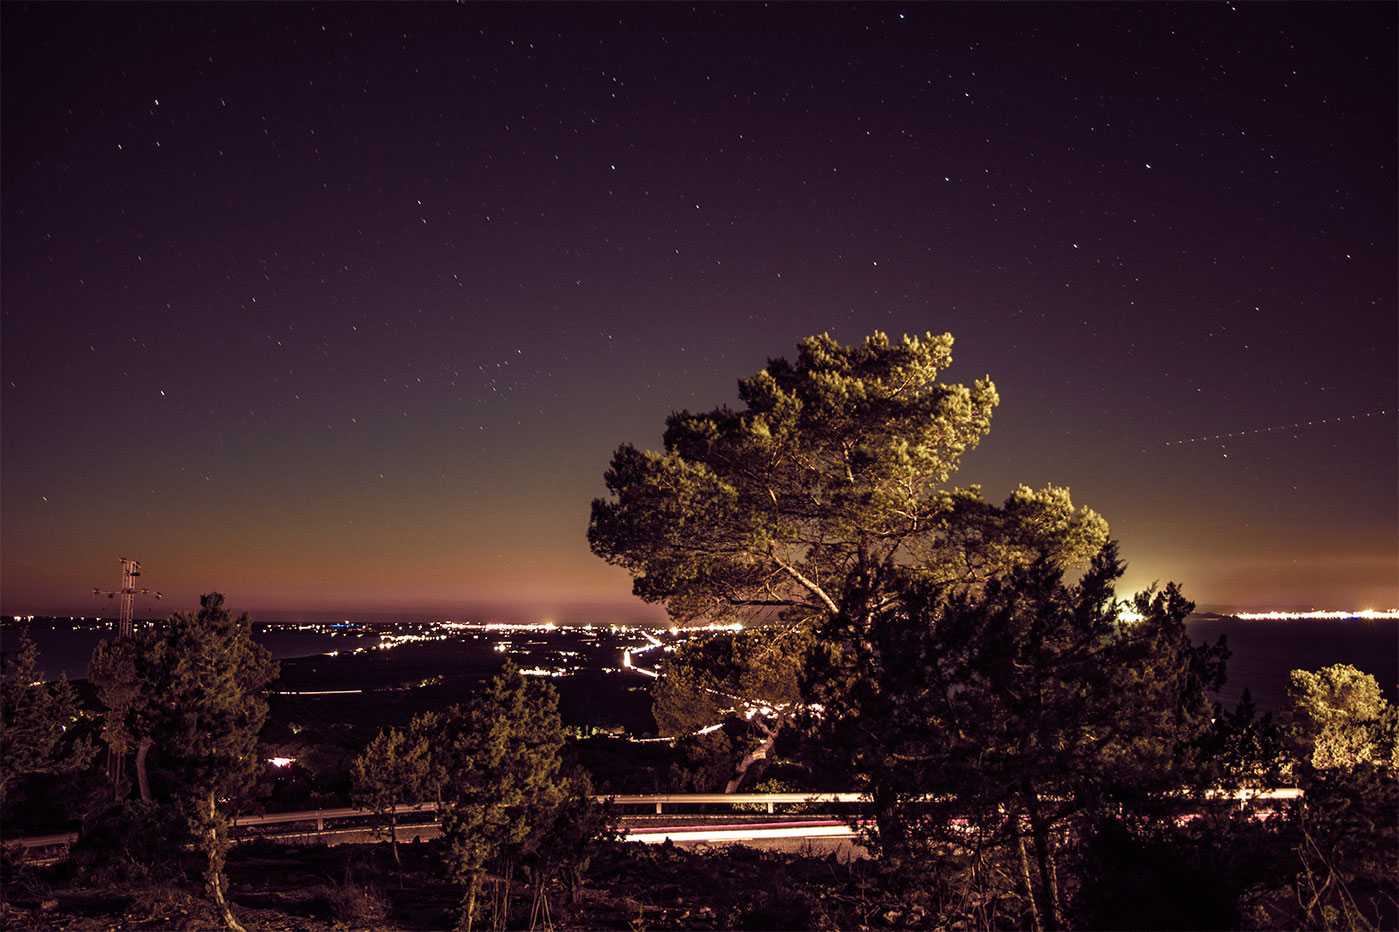 Slow speed shutter night photography with stars from Es Mirador landscape view at La Mola, Formentera, (Nos Dren).